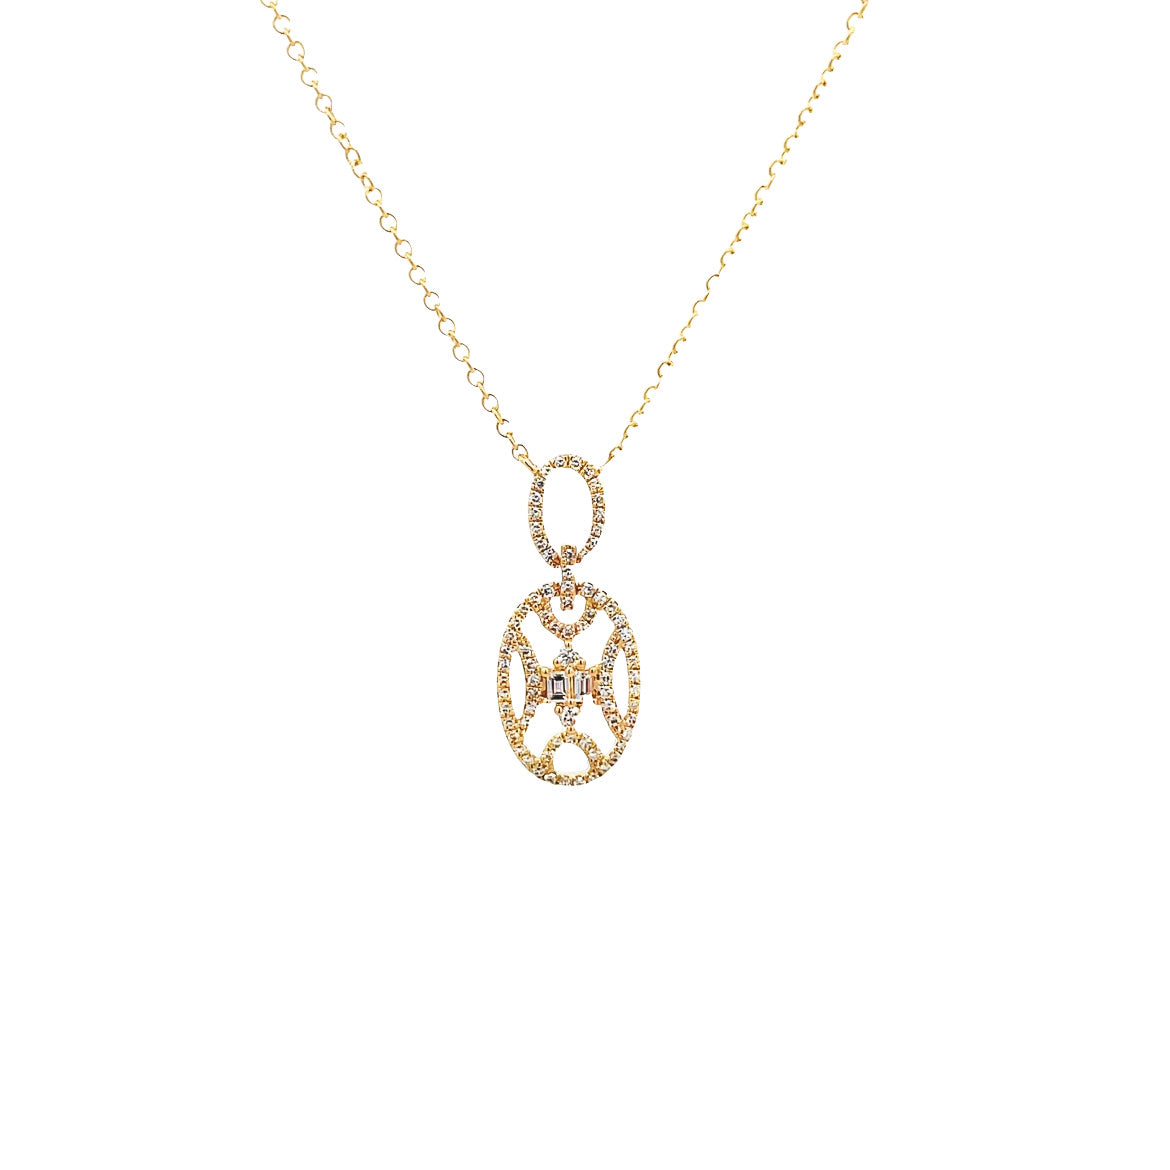 14K GOLD OVAL NECKLACE WITH BAGUETTE DIAMOND